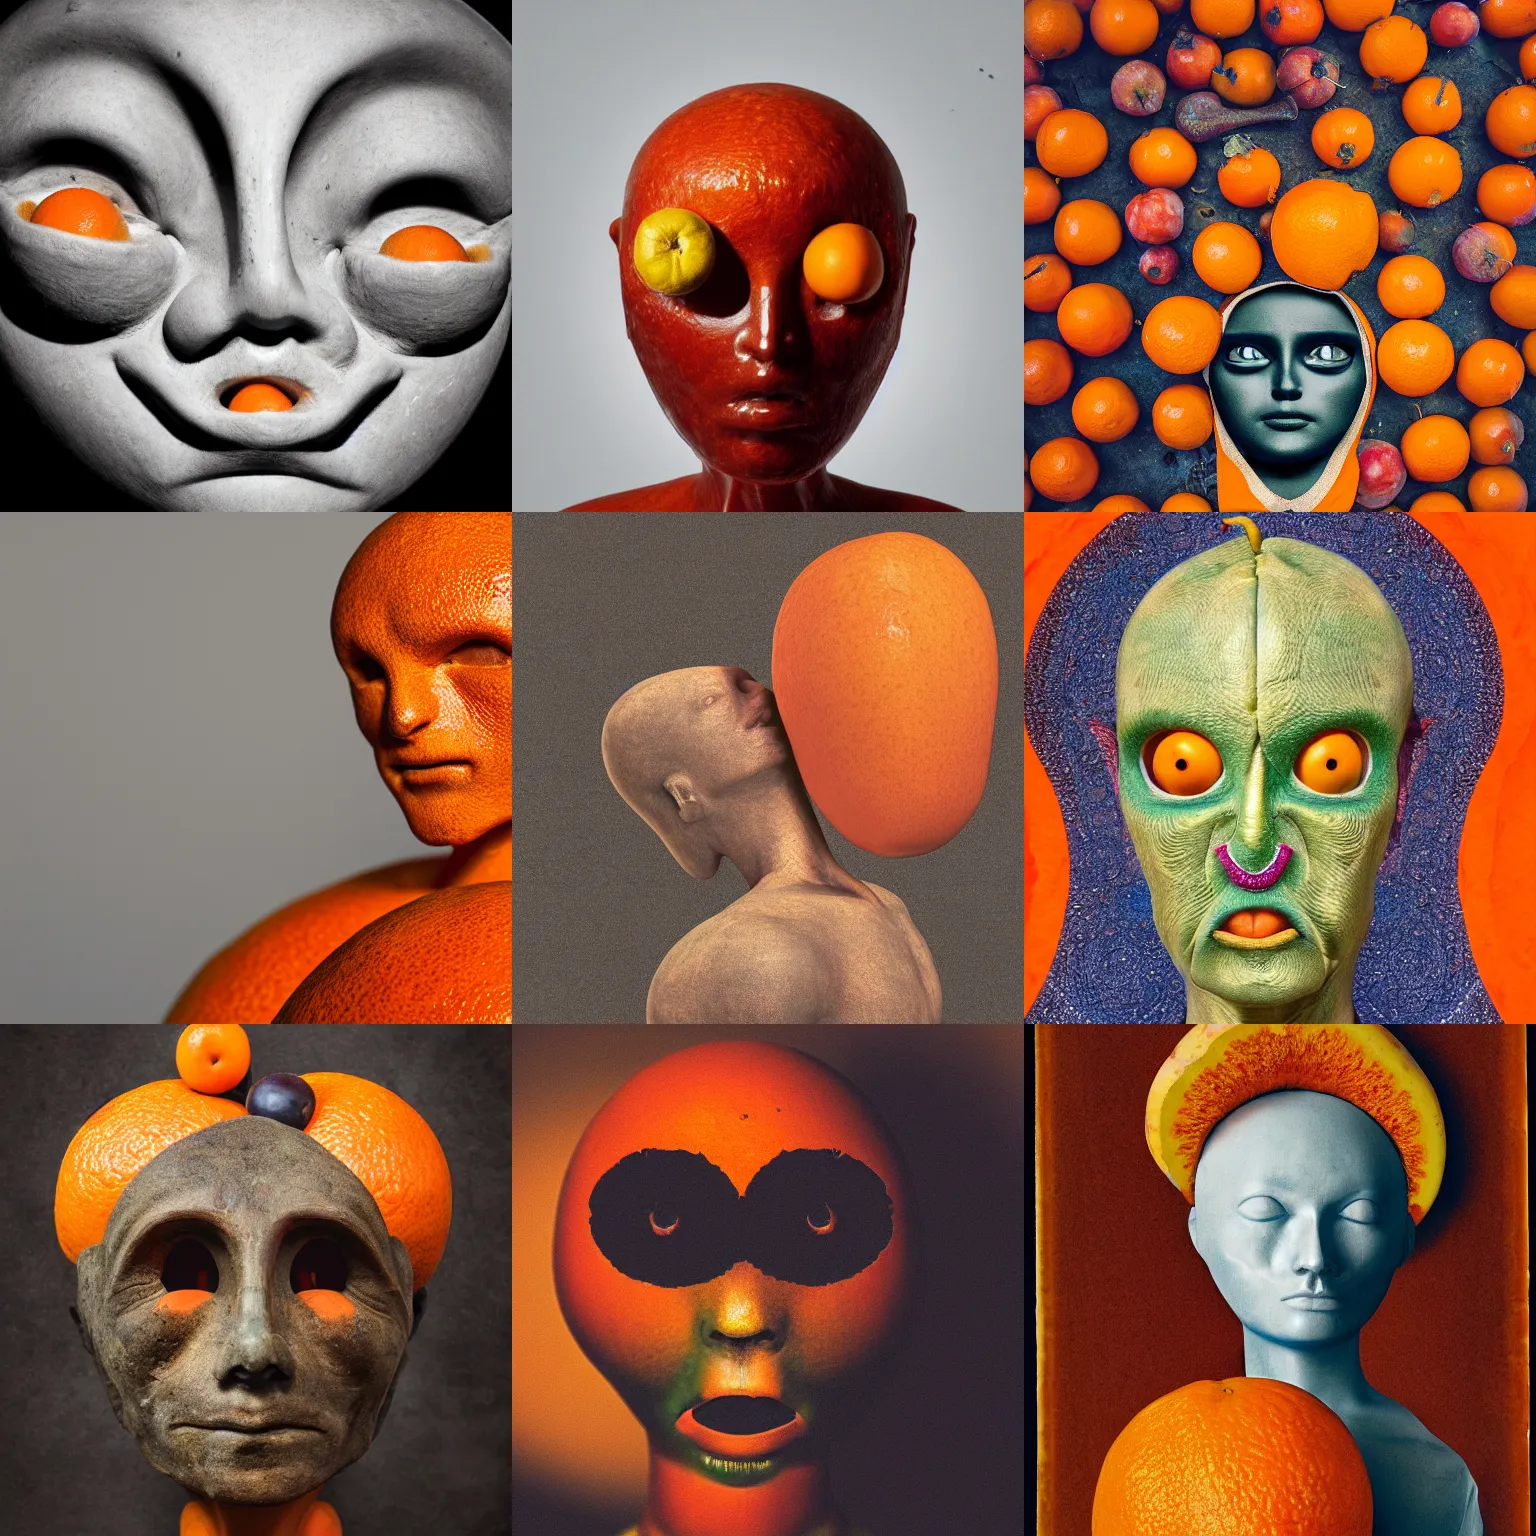 Prompt: portrait of humanoid with crescent-shaped head, looking at the orange fruit, highly detailed, photography,